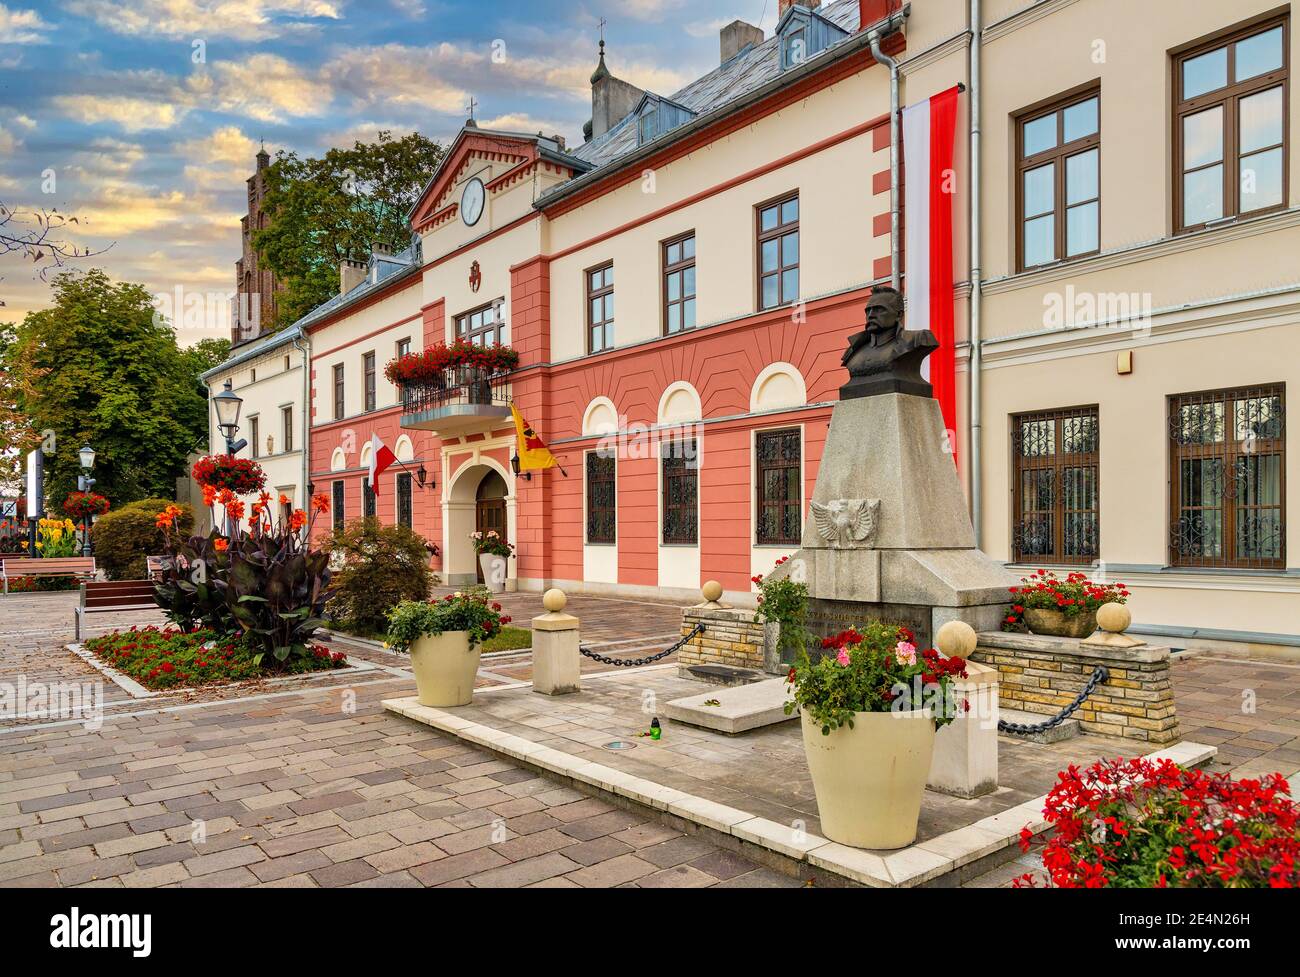 Olkusz, Poland - August 24, 2020: Historic Town Hall at Olkusz market square with in Beskidy mountain region of Lesser Poland Stock Photo